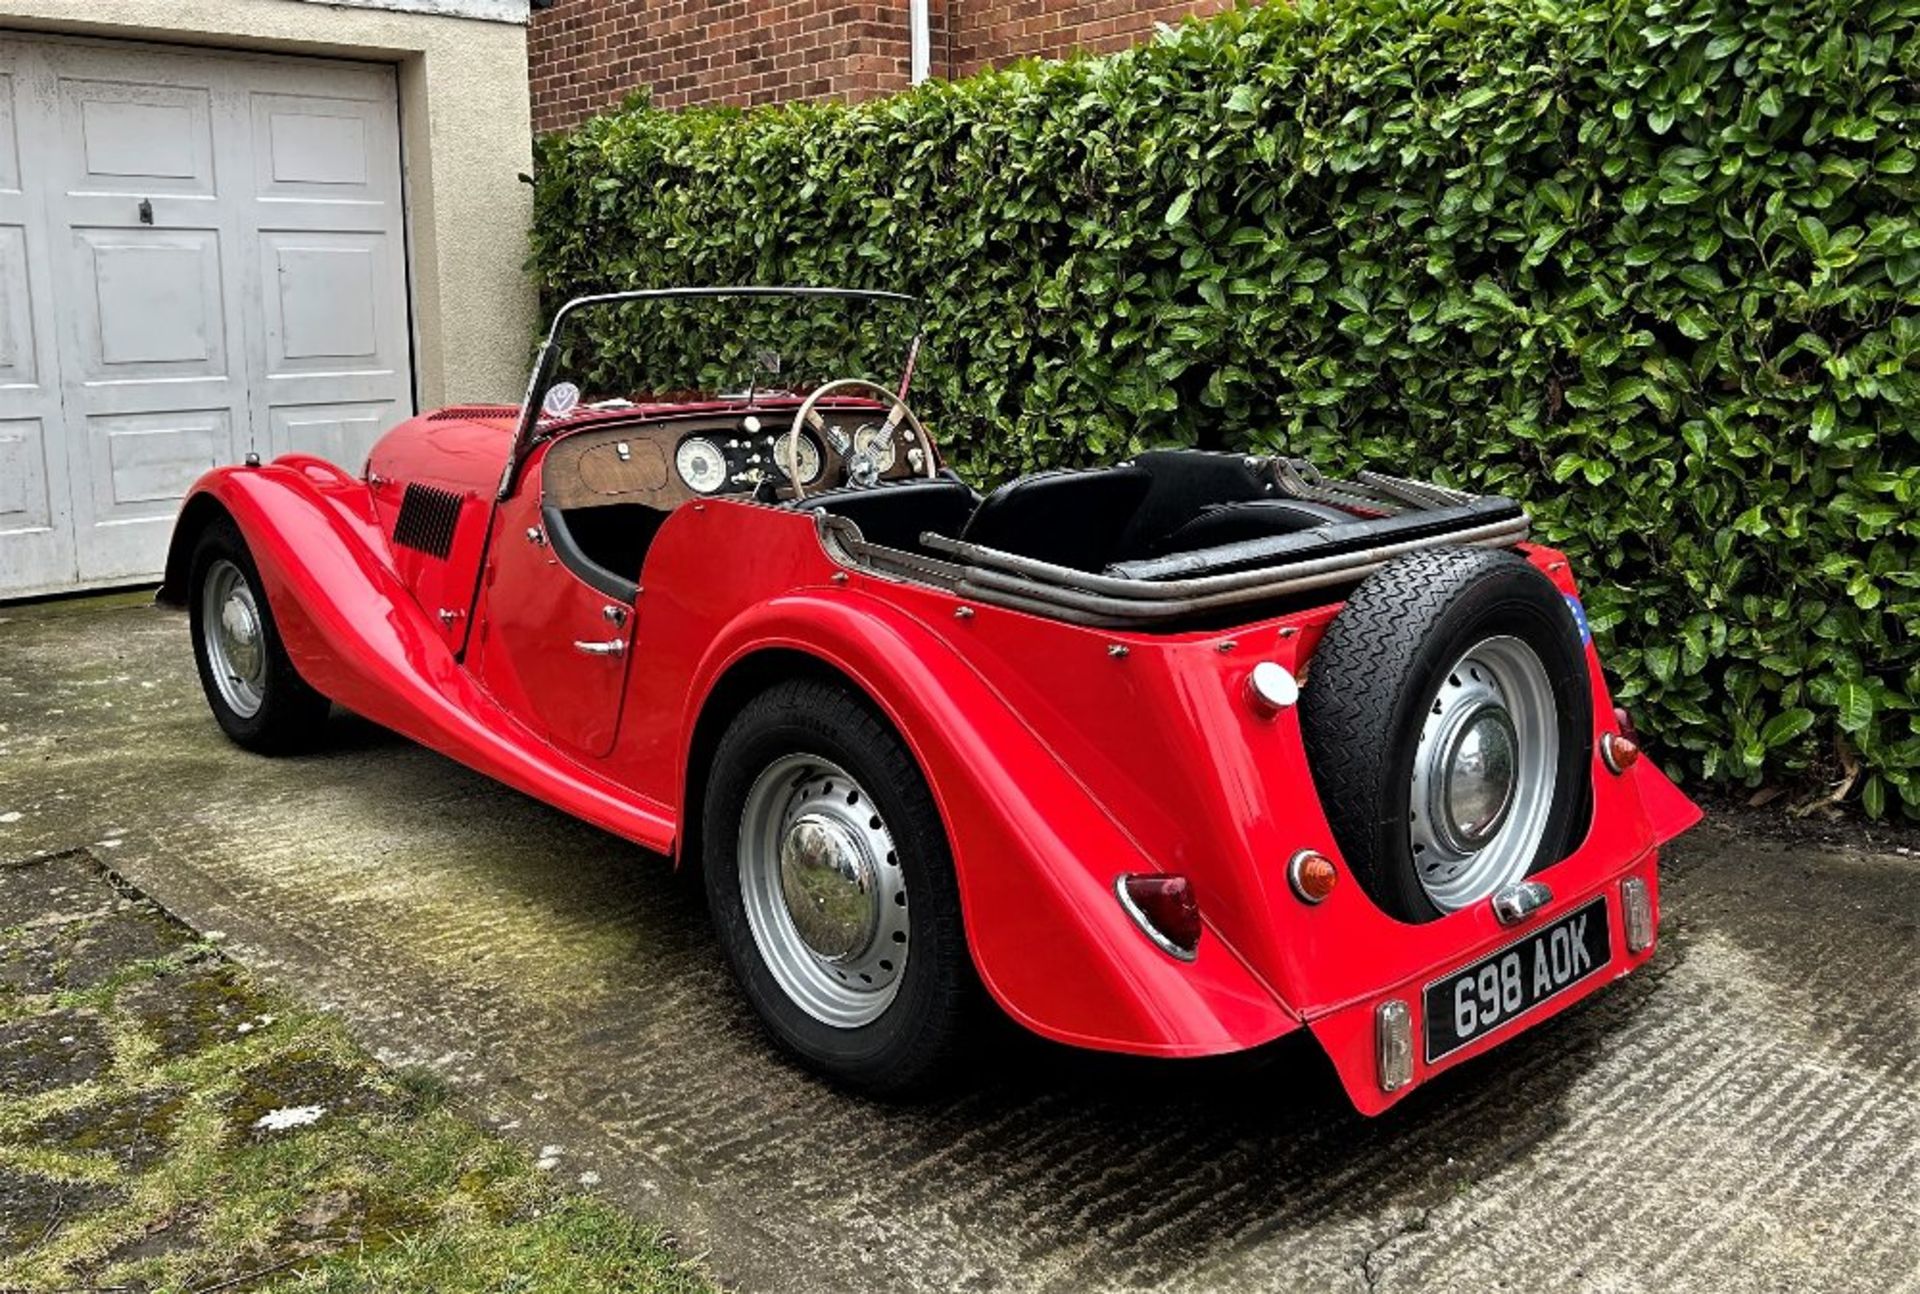 1959 MORGAN PLUS FOUR Registration Number: 698 AOK Chassis Number: 4398 Recorded Mileage: TBA - - Image 2 of 15